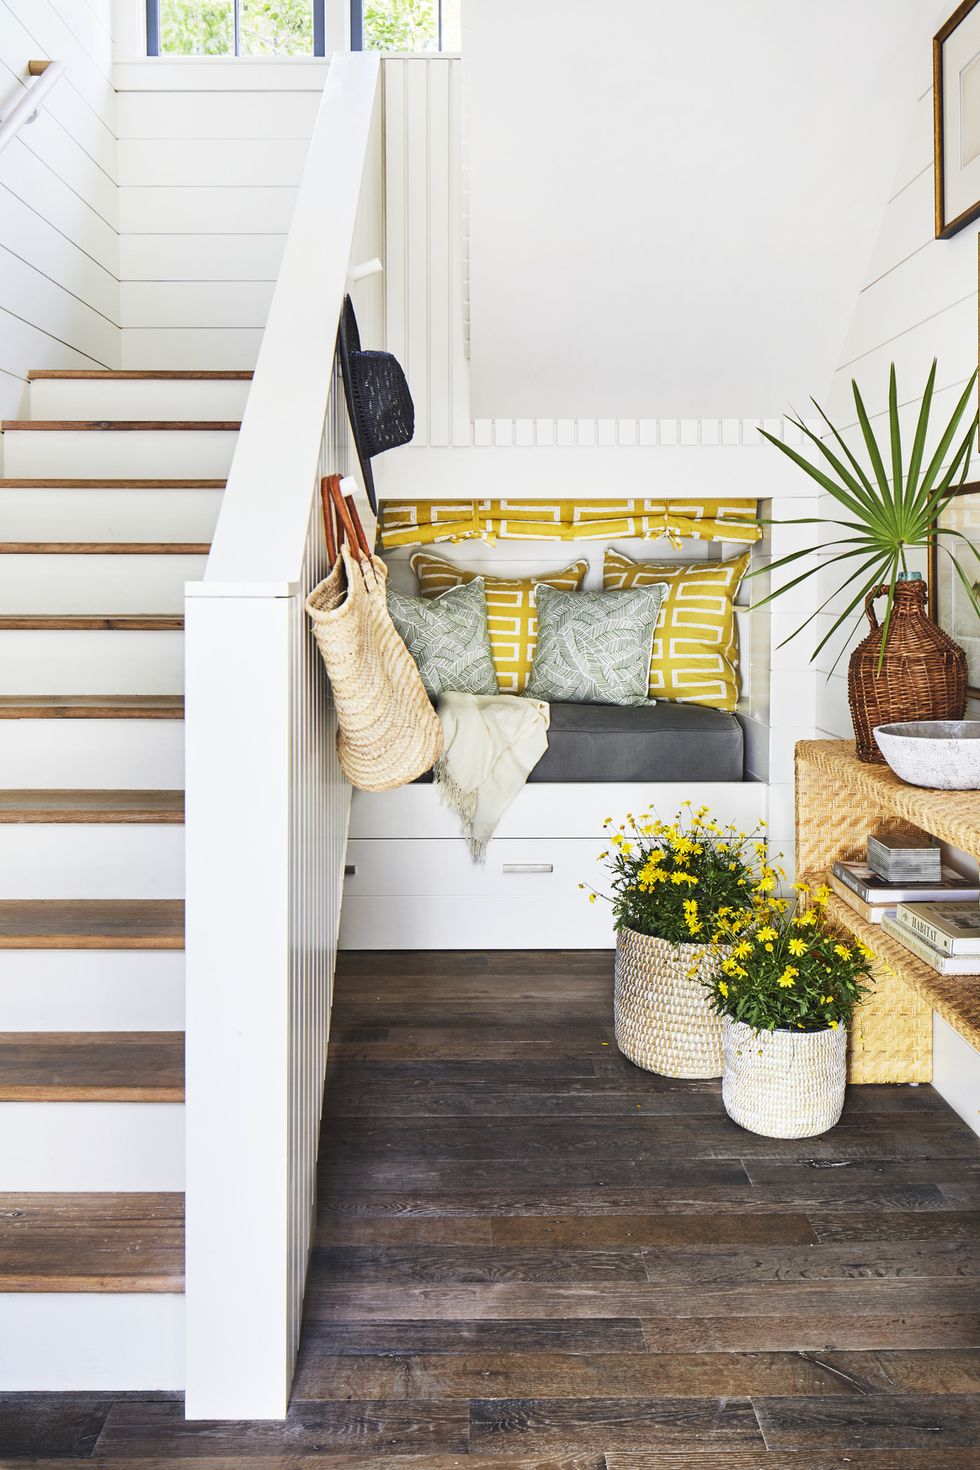 The Staircase Trend You Need To Know About For 2023